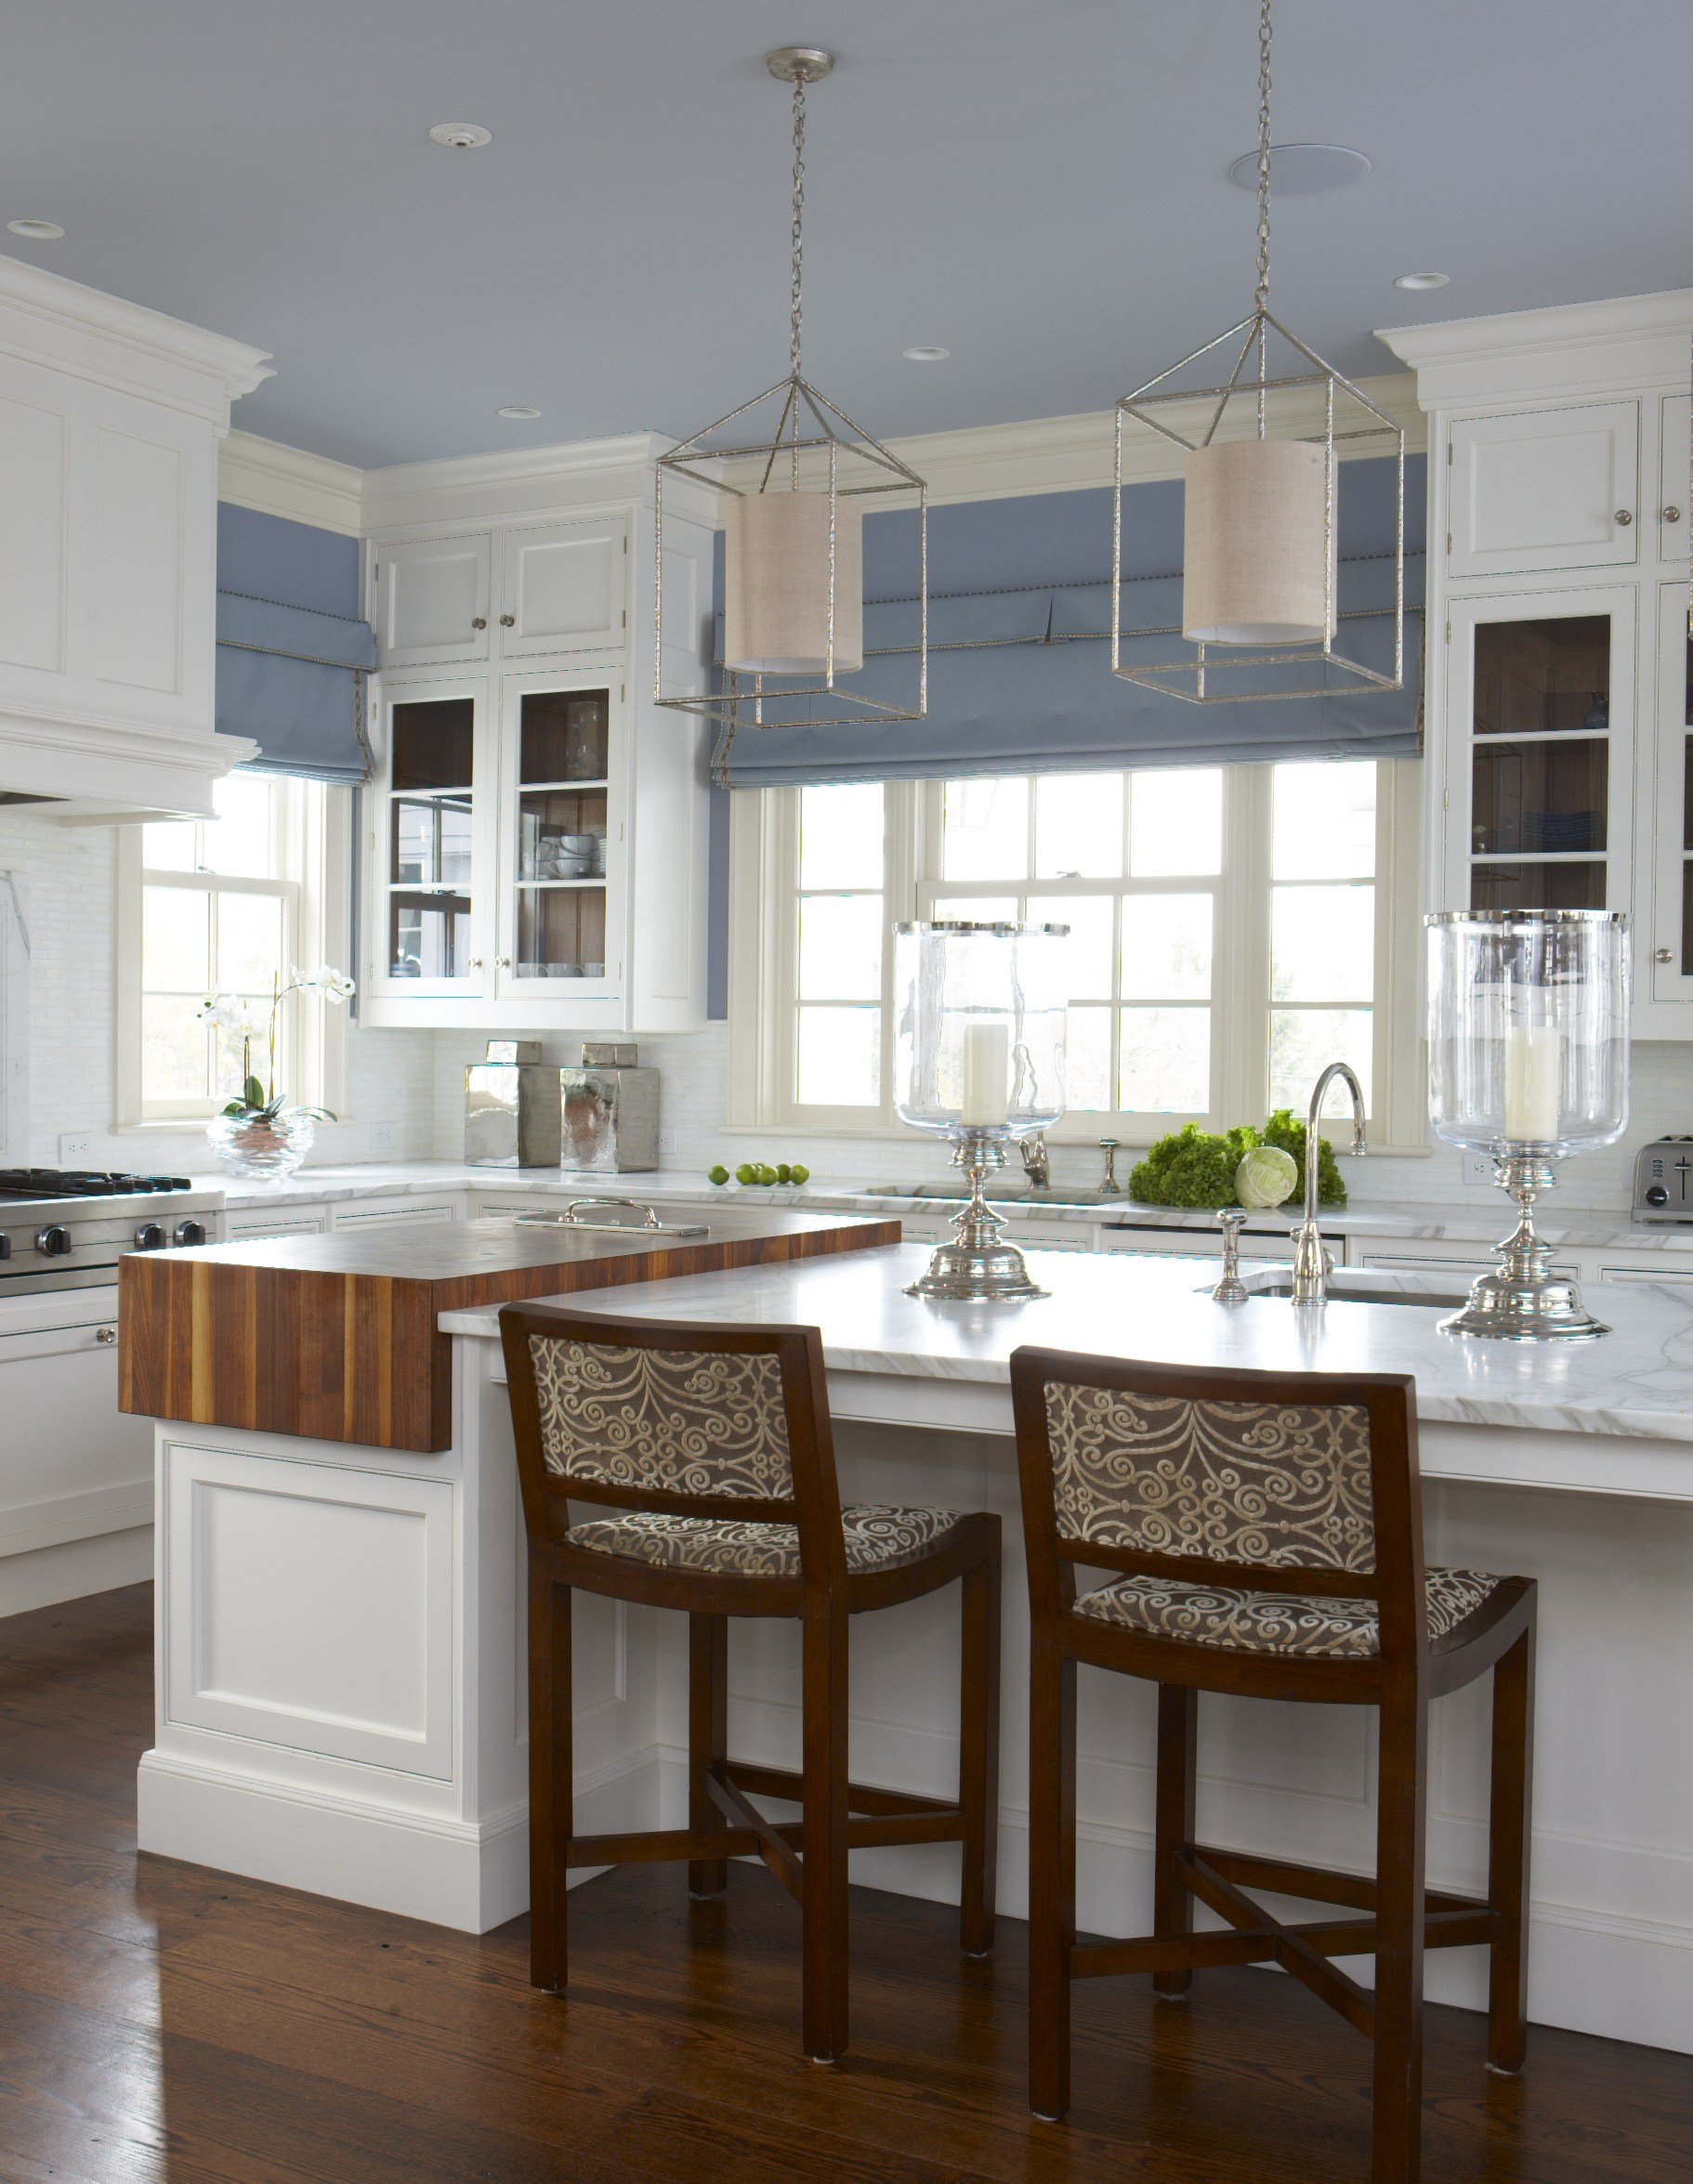 7-kitchen-white-blue-marble-bright-transitional-colonial-greenwich-connecticut.jpg